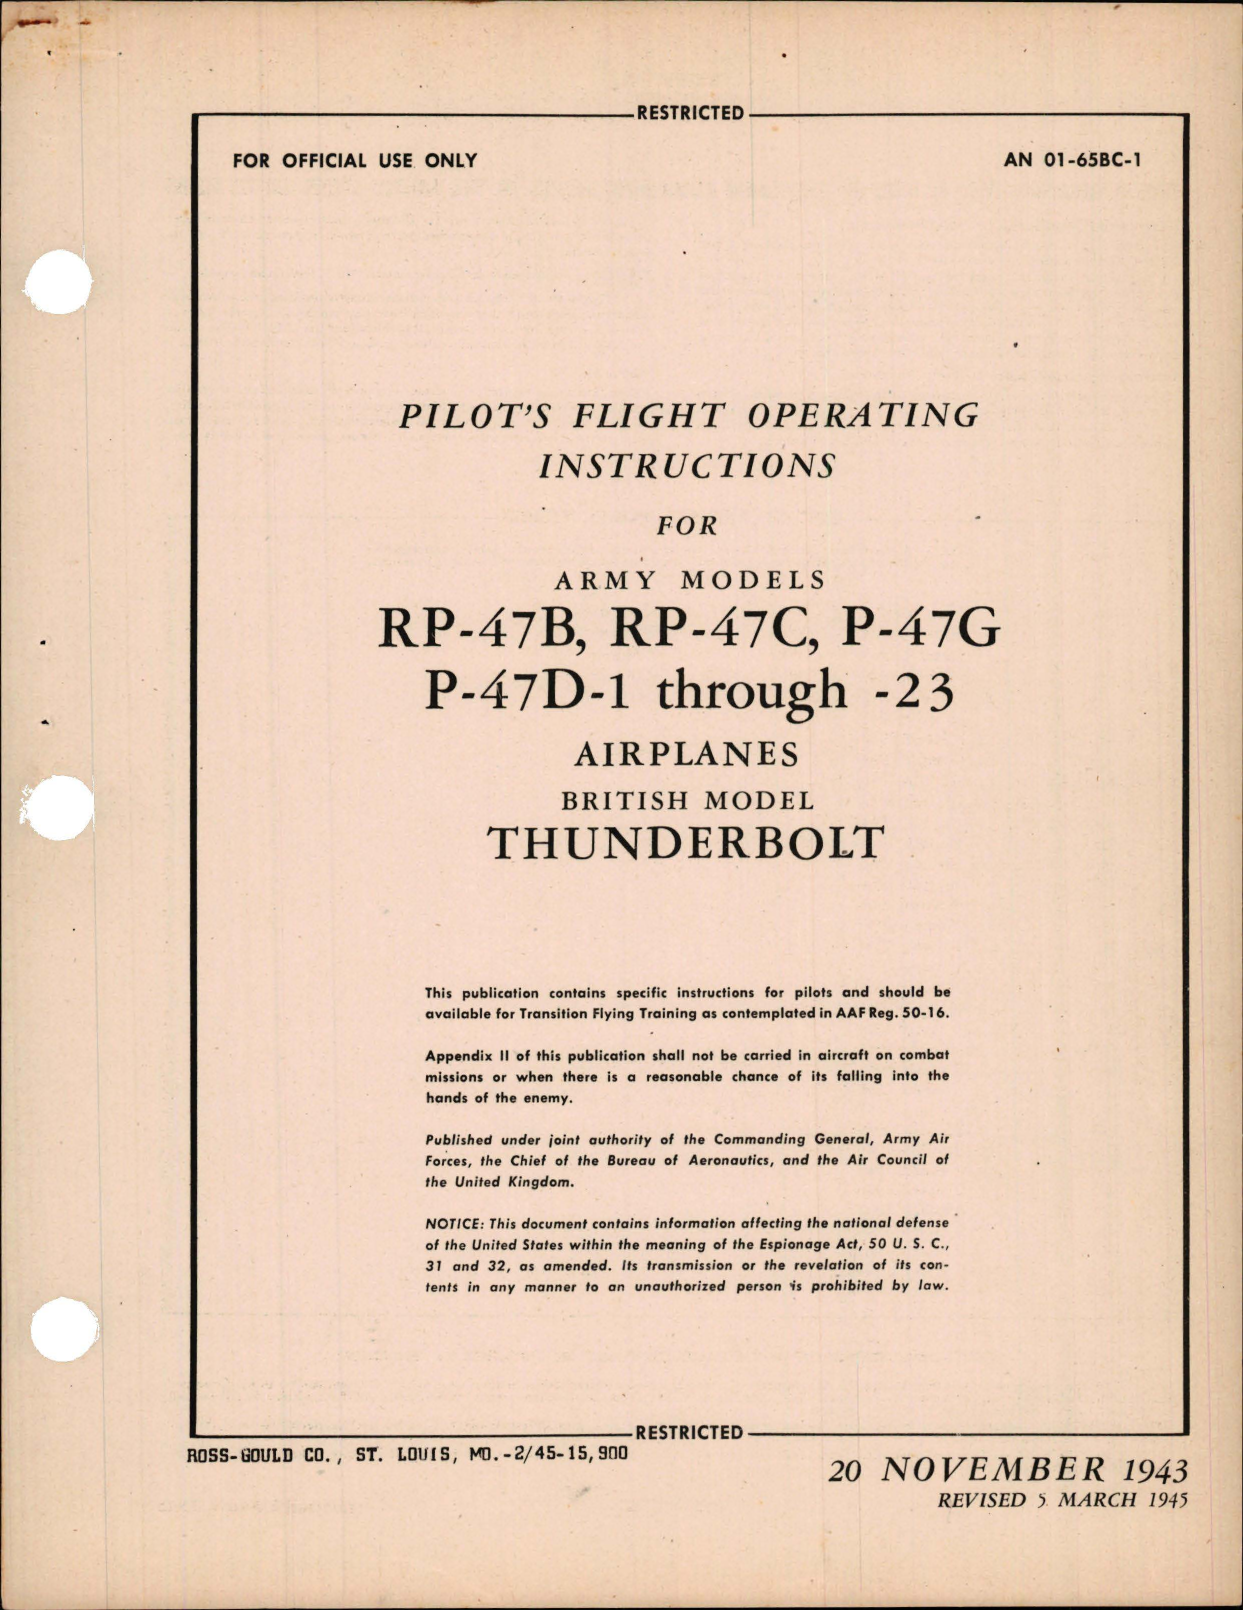 Sample page 1 from AirCorps Library document: Pilot's Flight Operating Instructions for RP-47B, RP-47C, P-47G, P-47D-1 through P-47-23